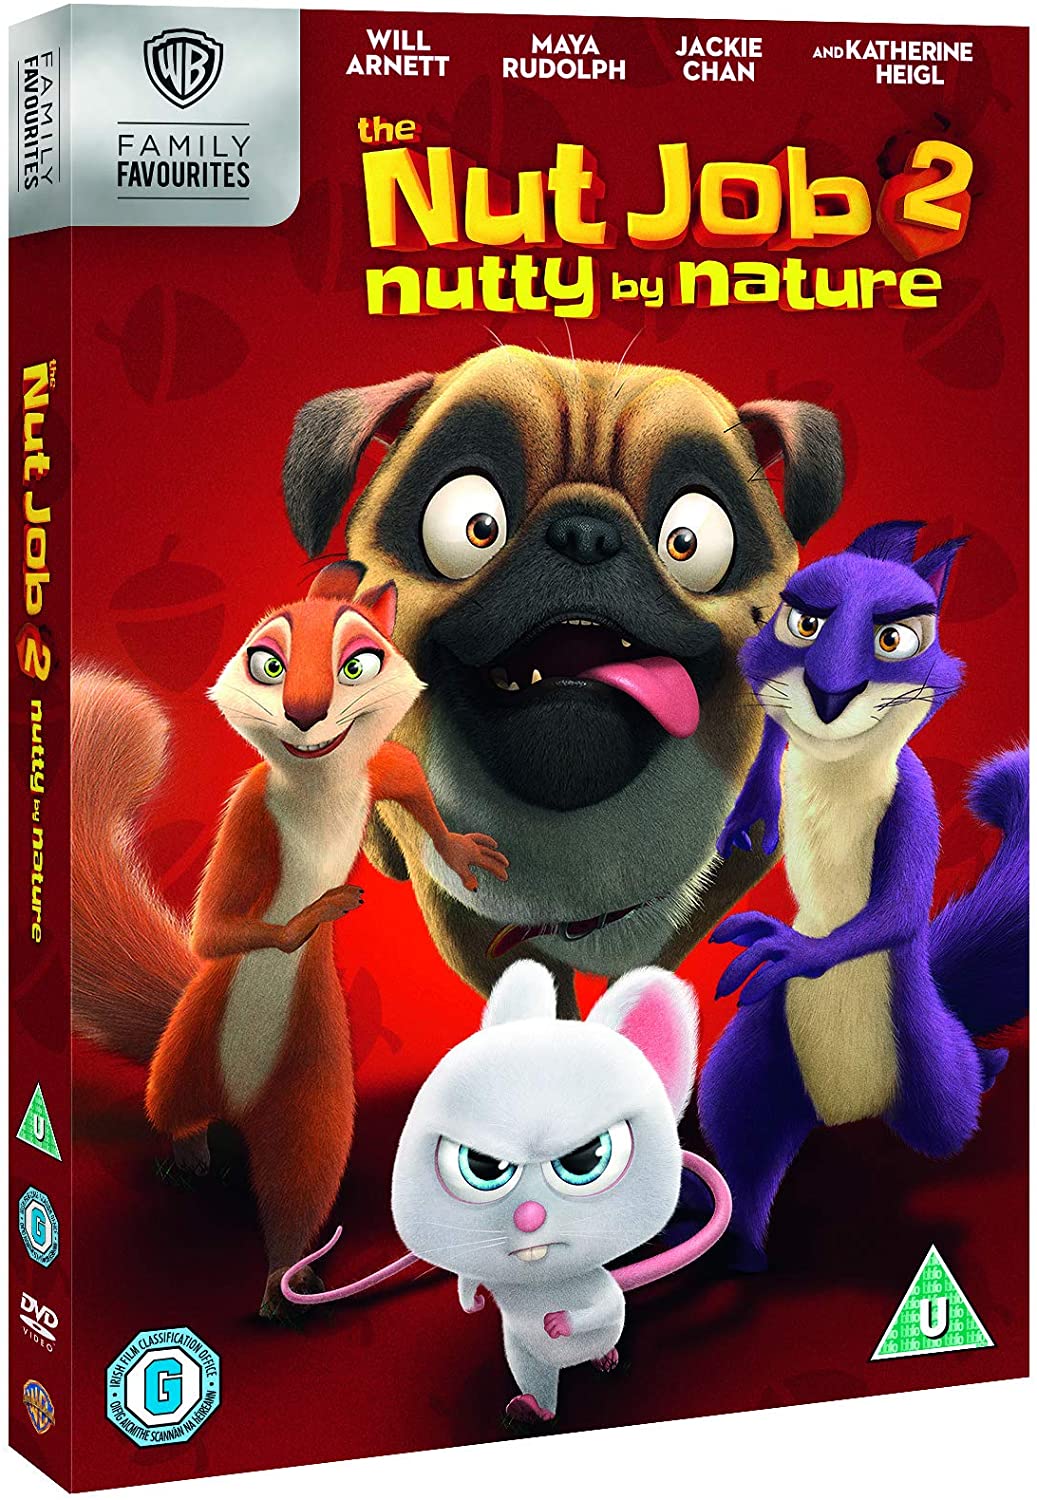 The Nut Job 2 - Nutty By Nature [DVD] [2017]